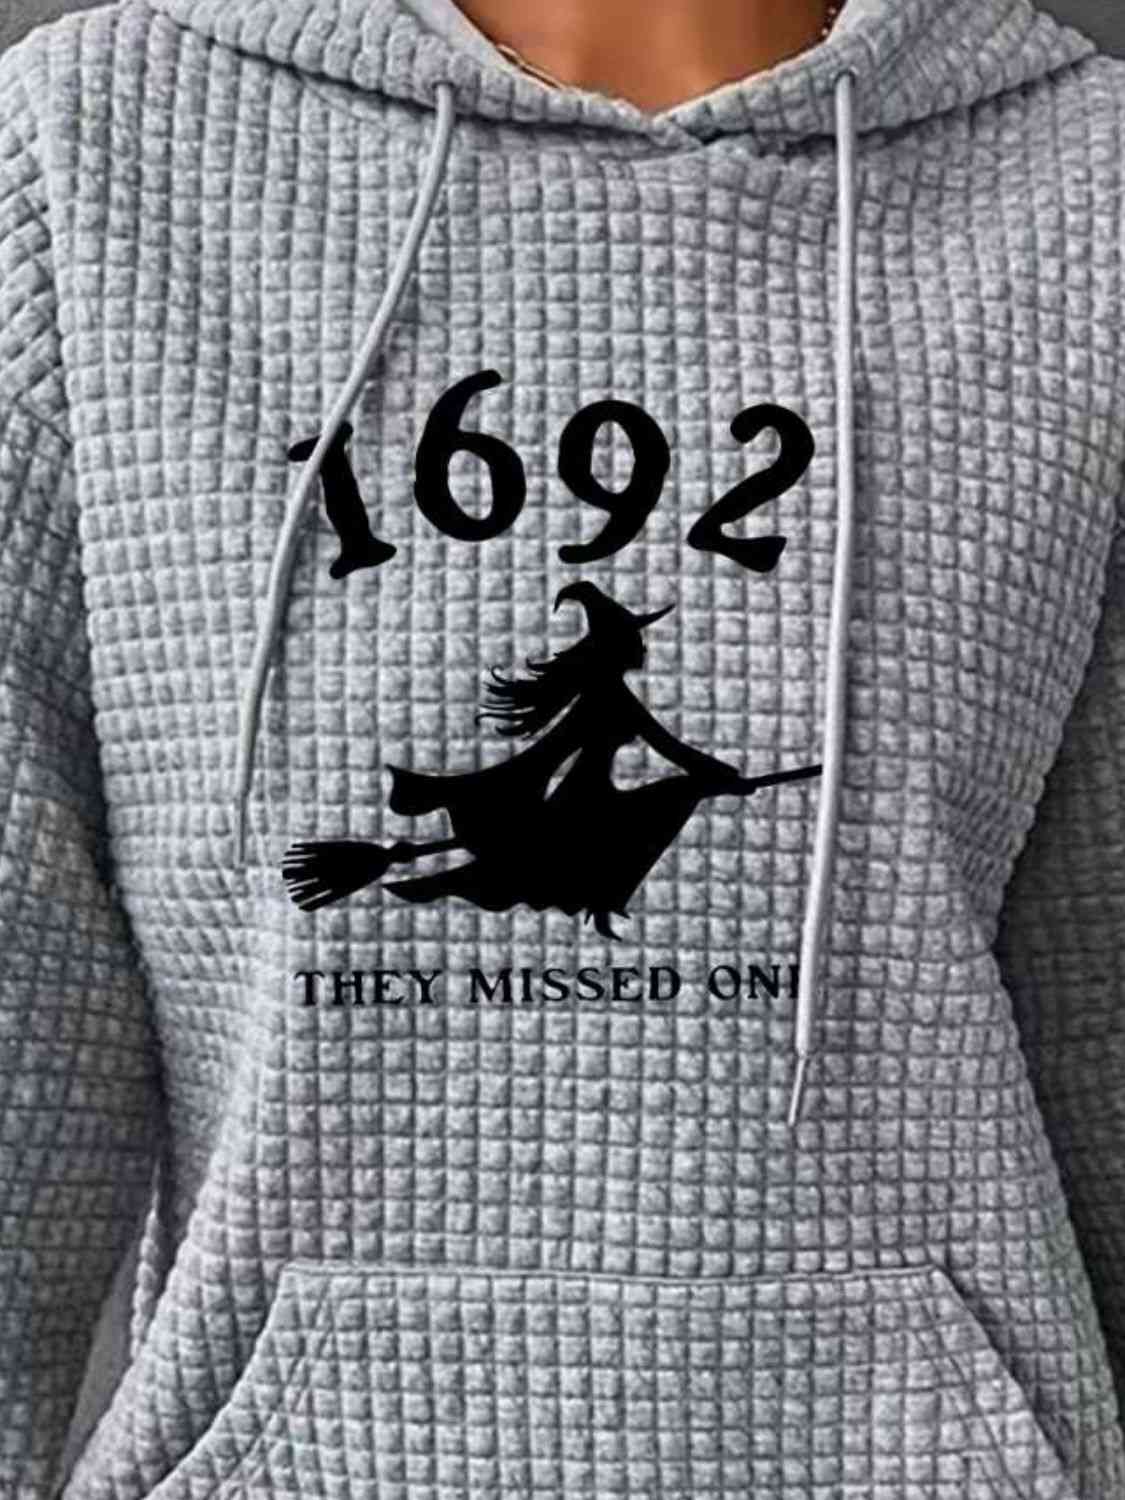 1962 THEY MISSED ONE Graphic Hoodie with Front Pocket - By Baano